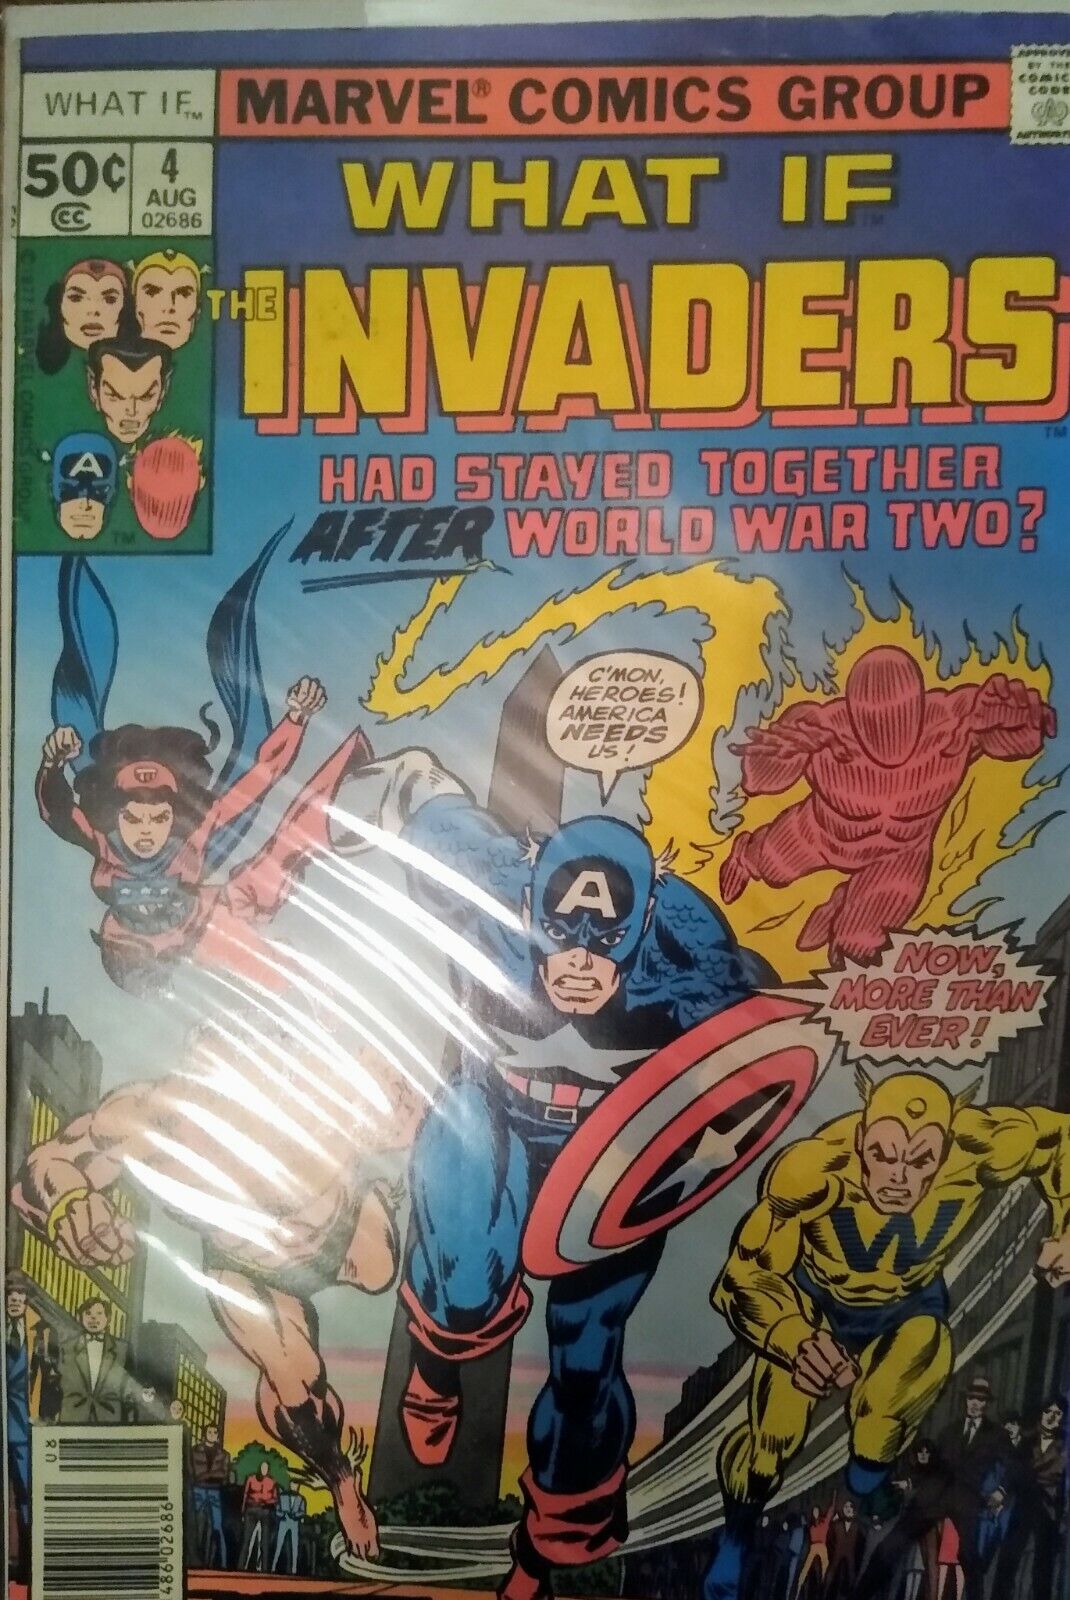 What If Vol. 1 # 4 Marvel Comics 1977 What If the Invaders Had Stayed Together..